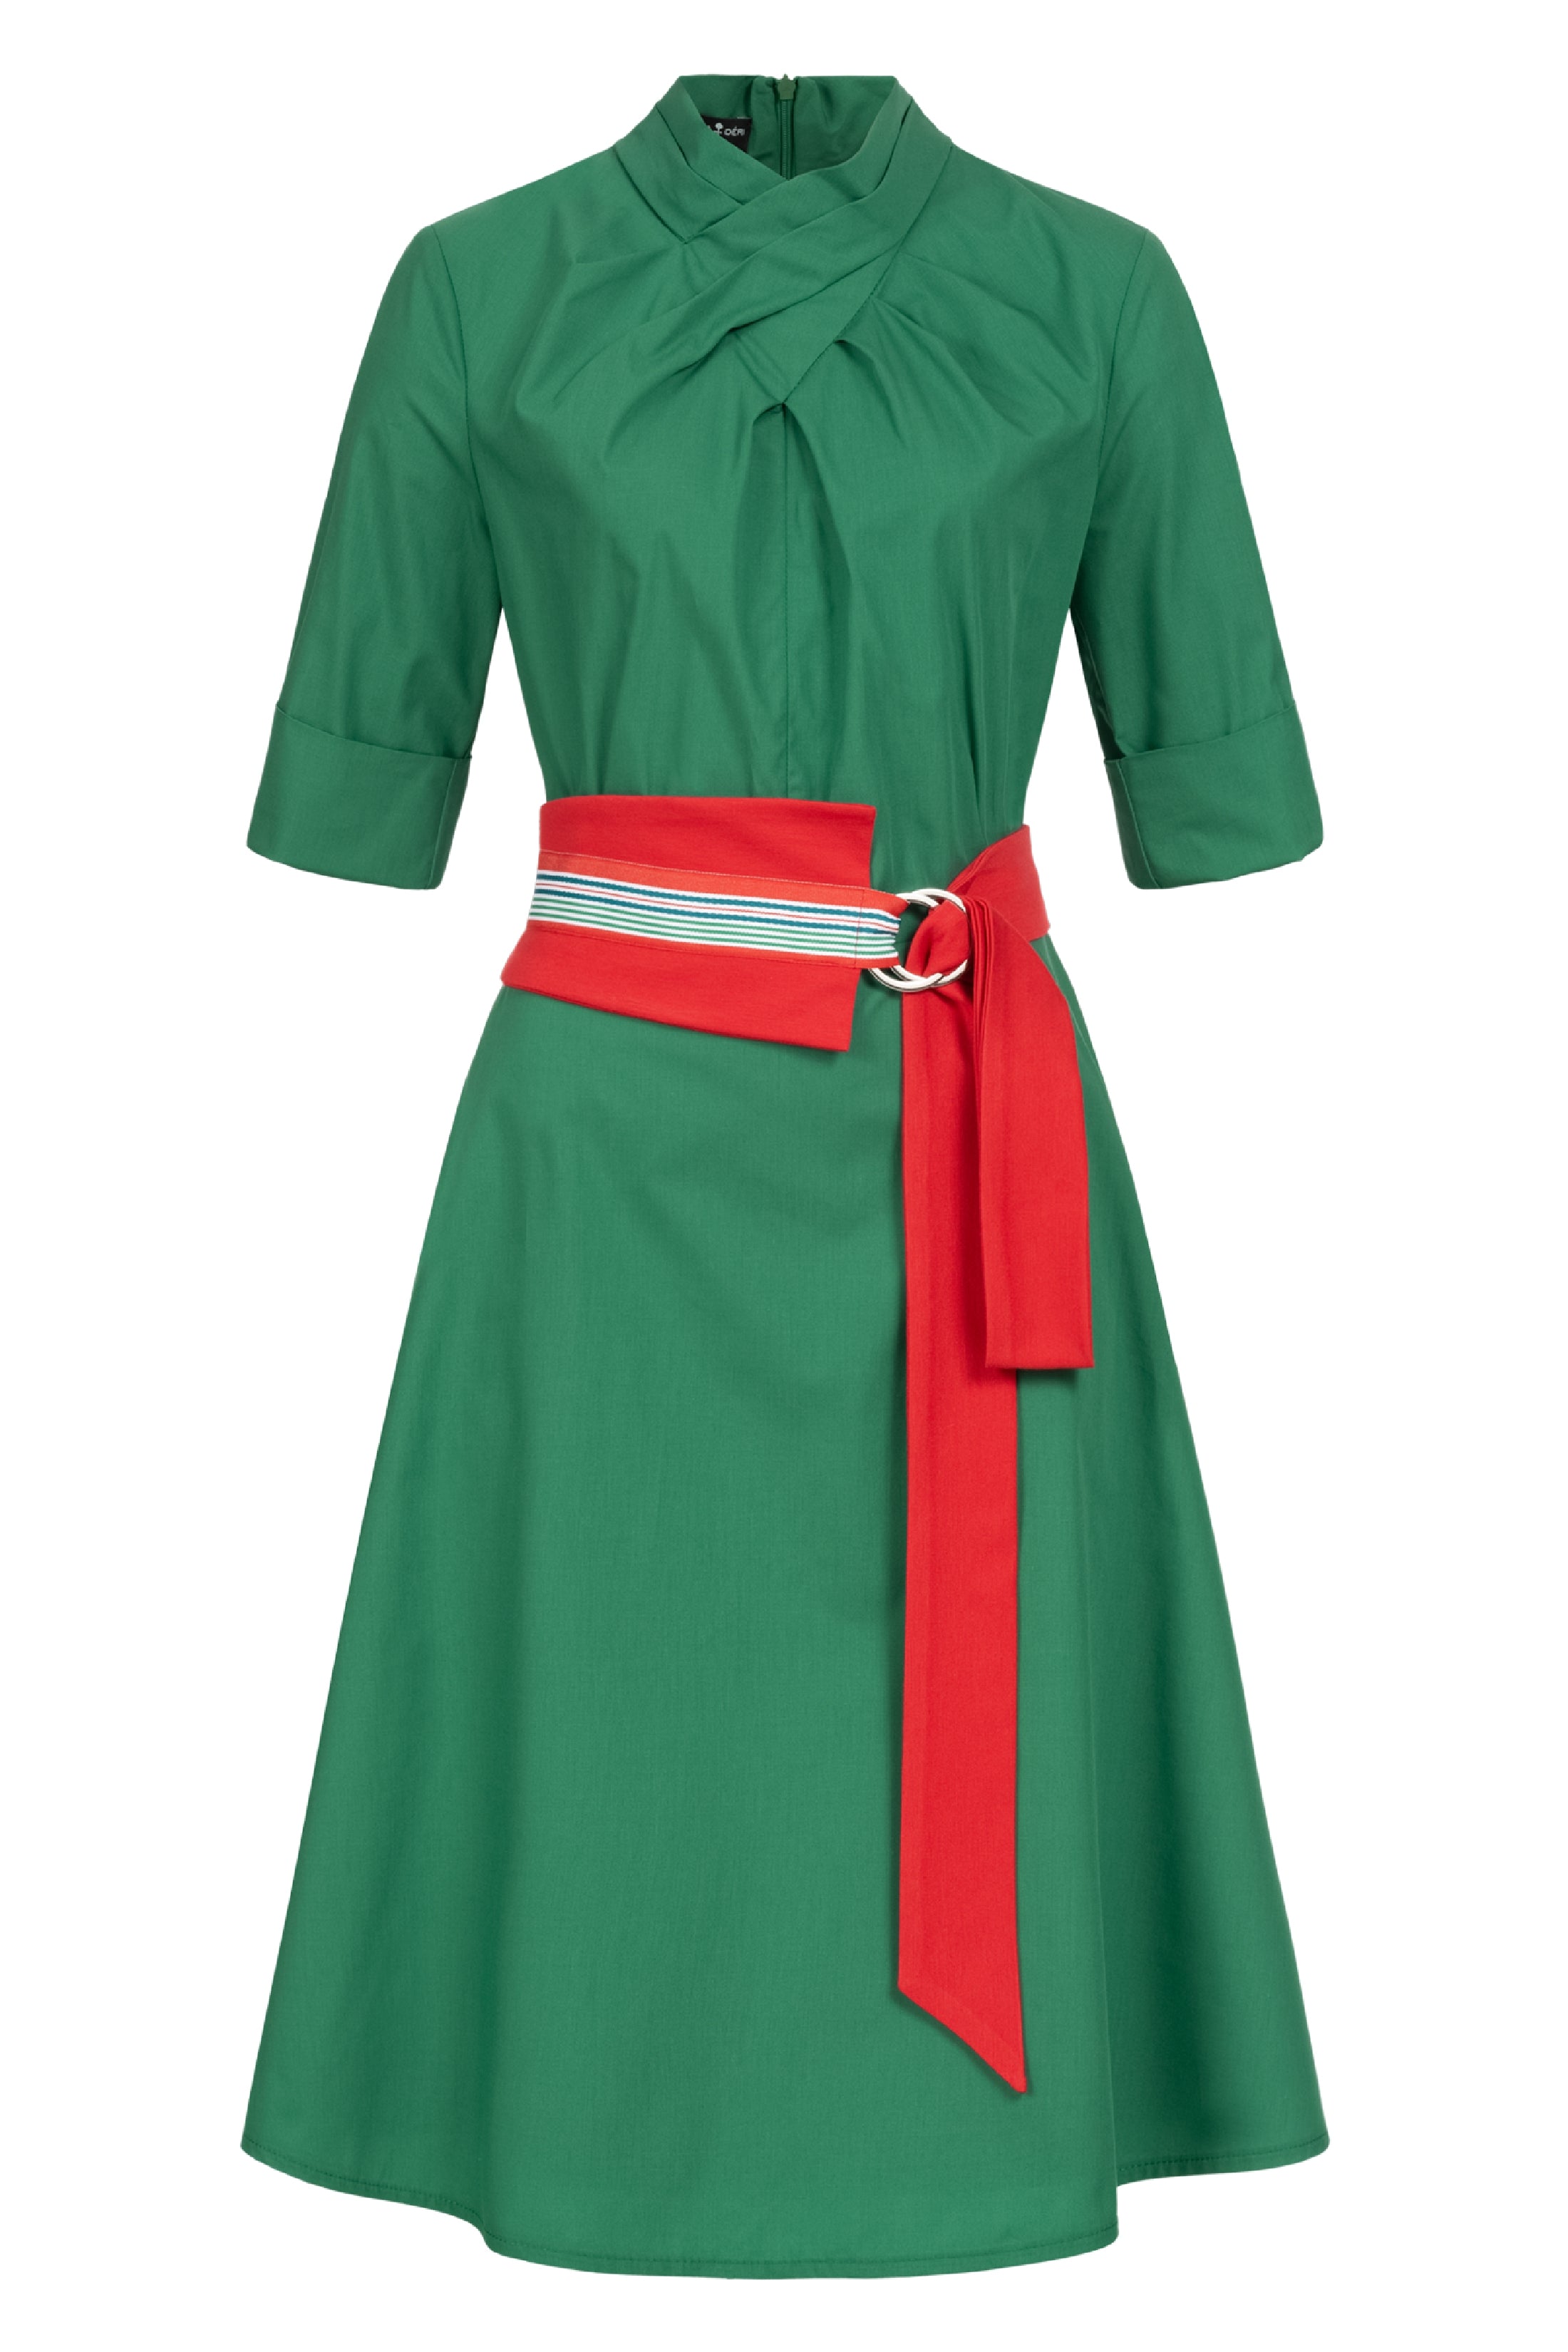 Franchesca Dress Green with Two Belts – Marianna Déri